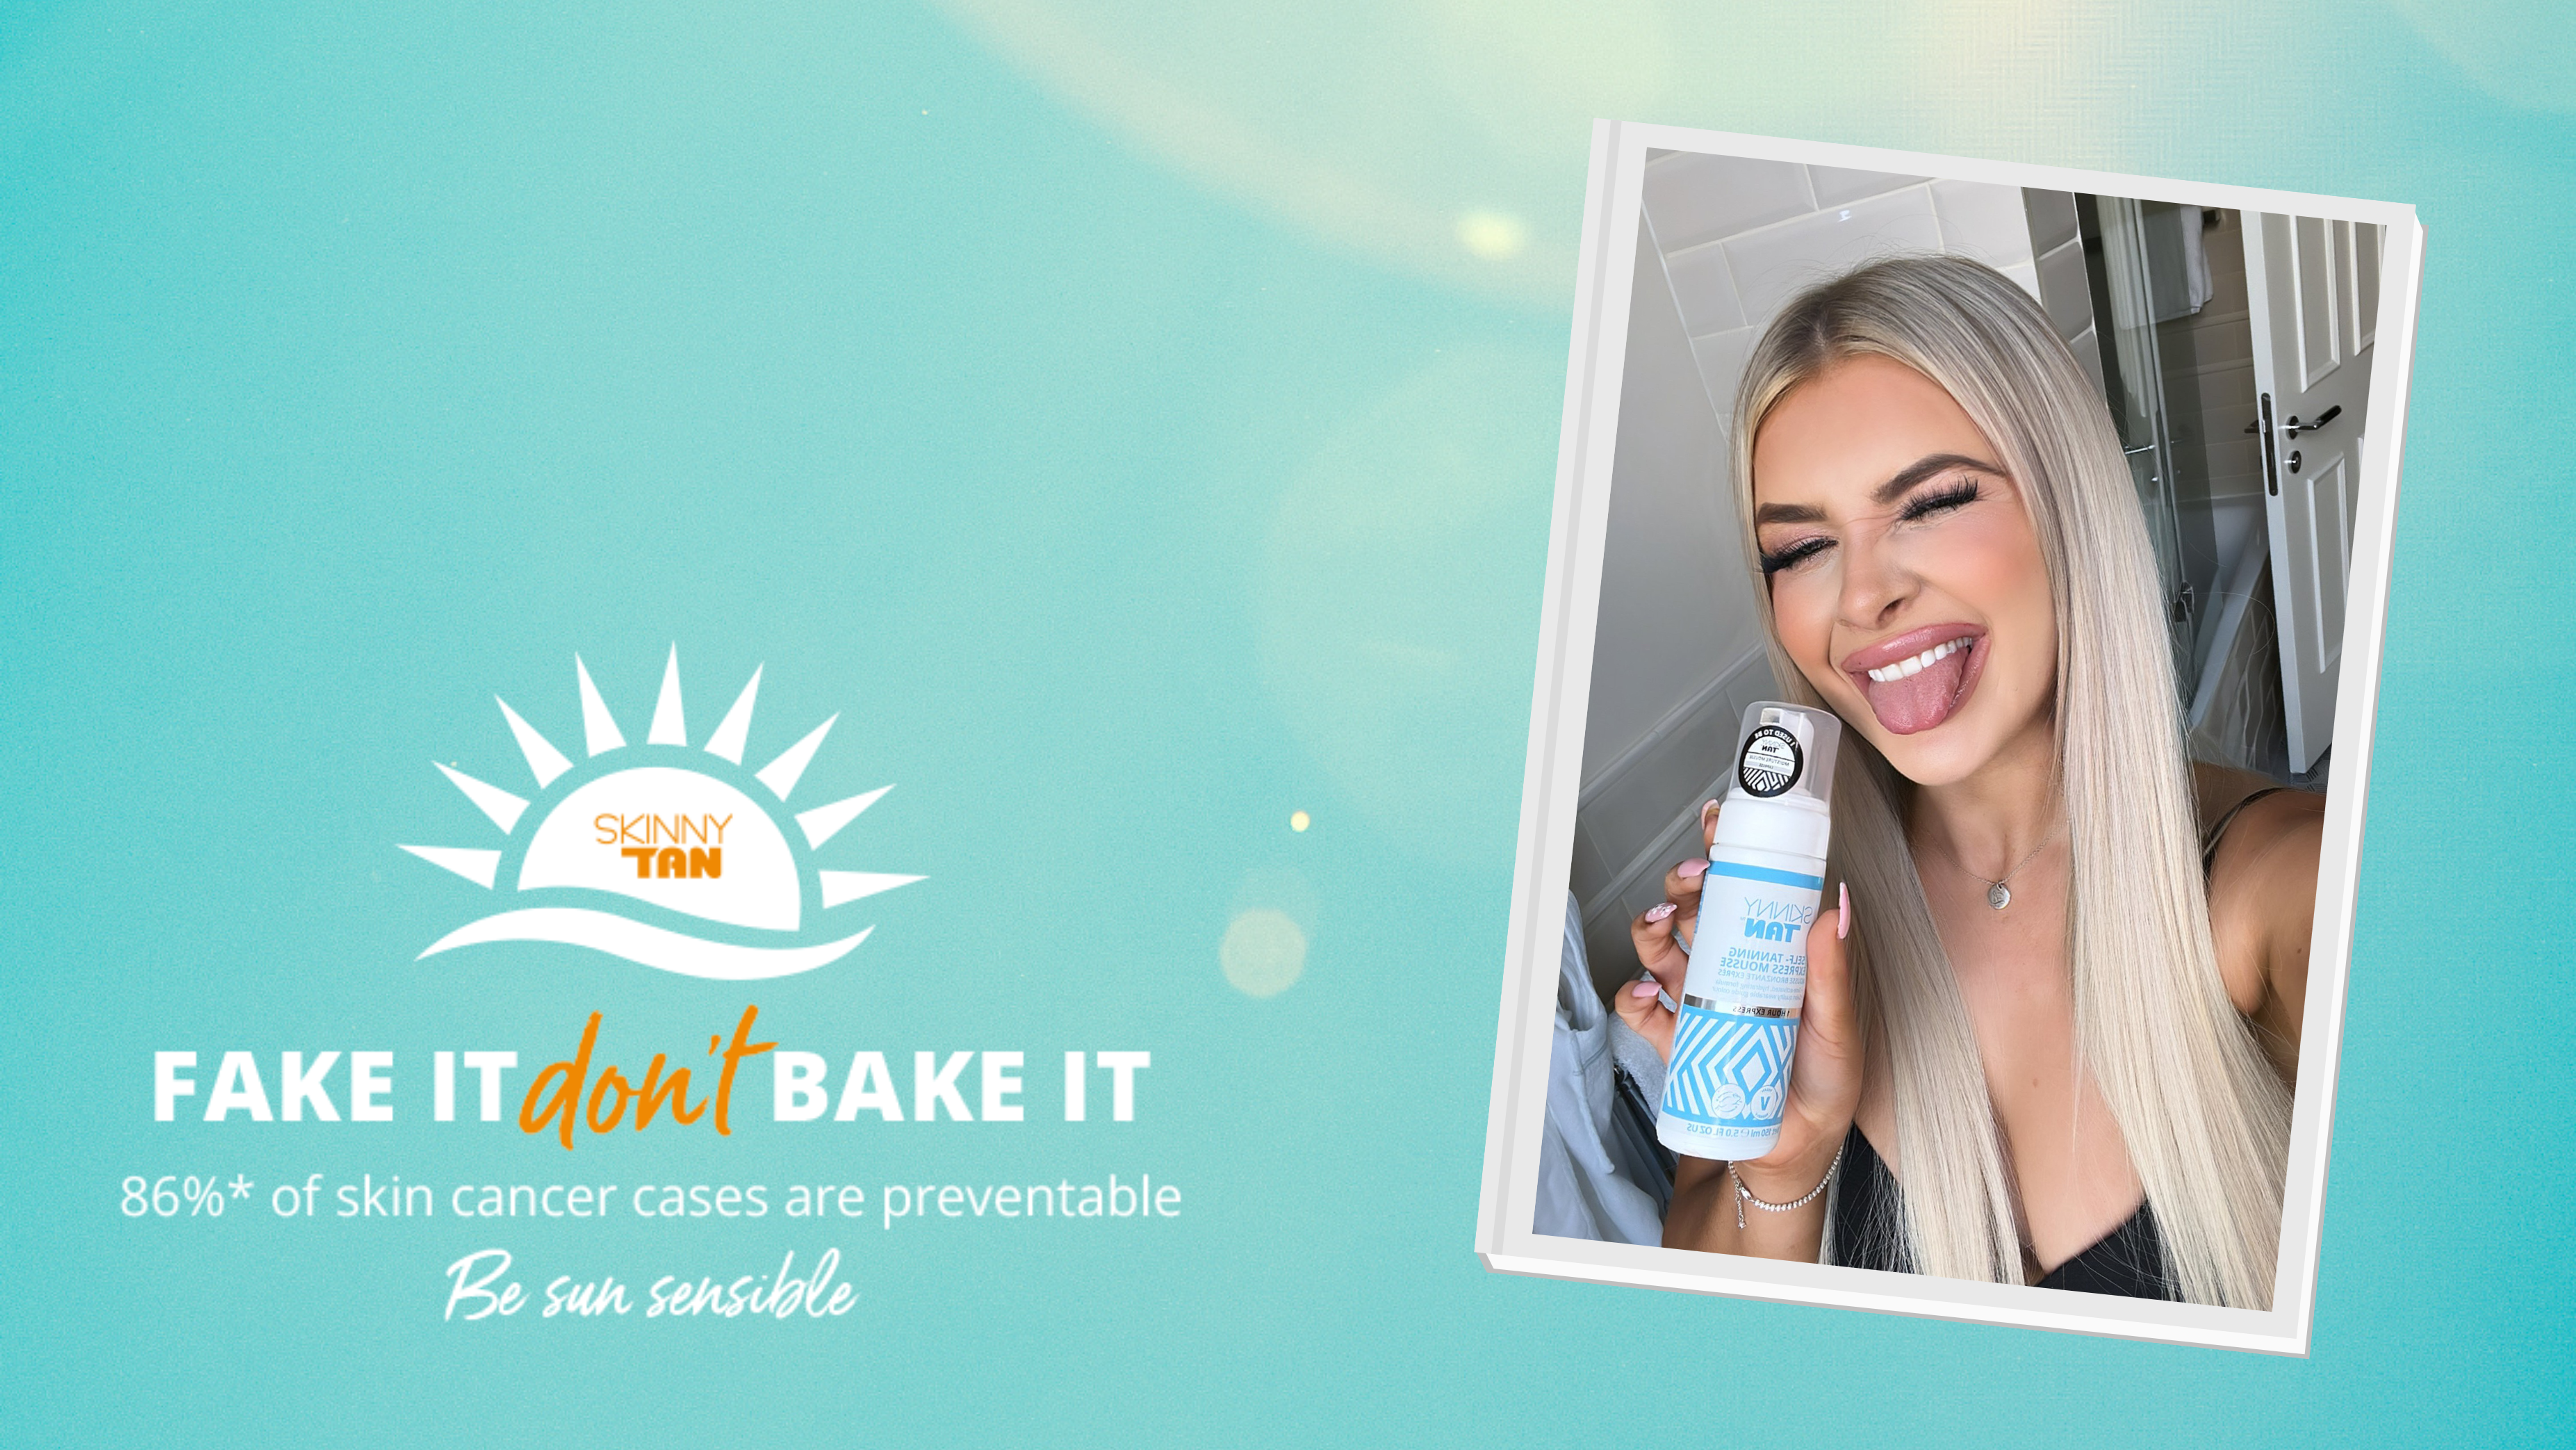 Fake It, Don't Bake It This Summer!